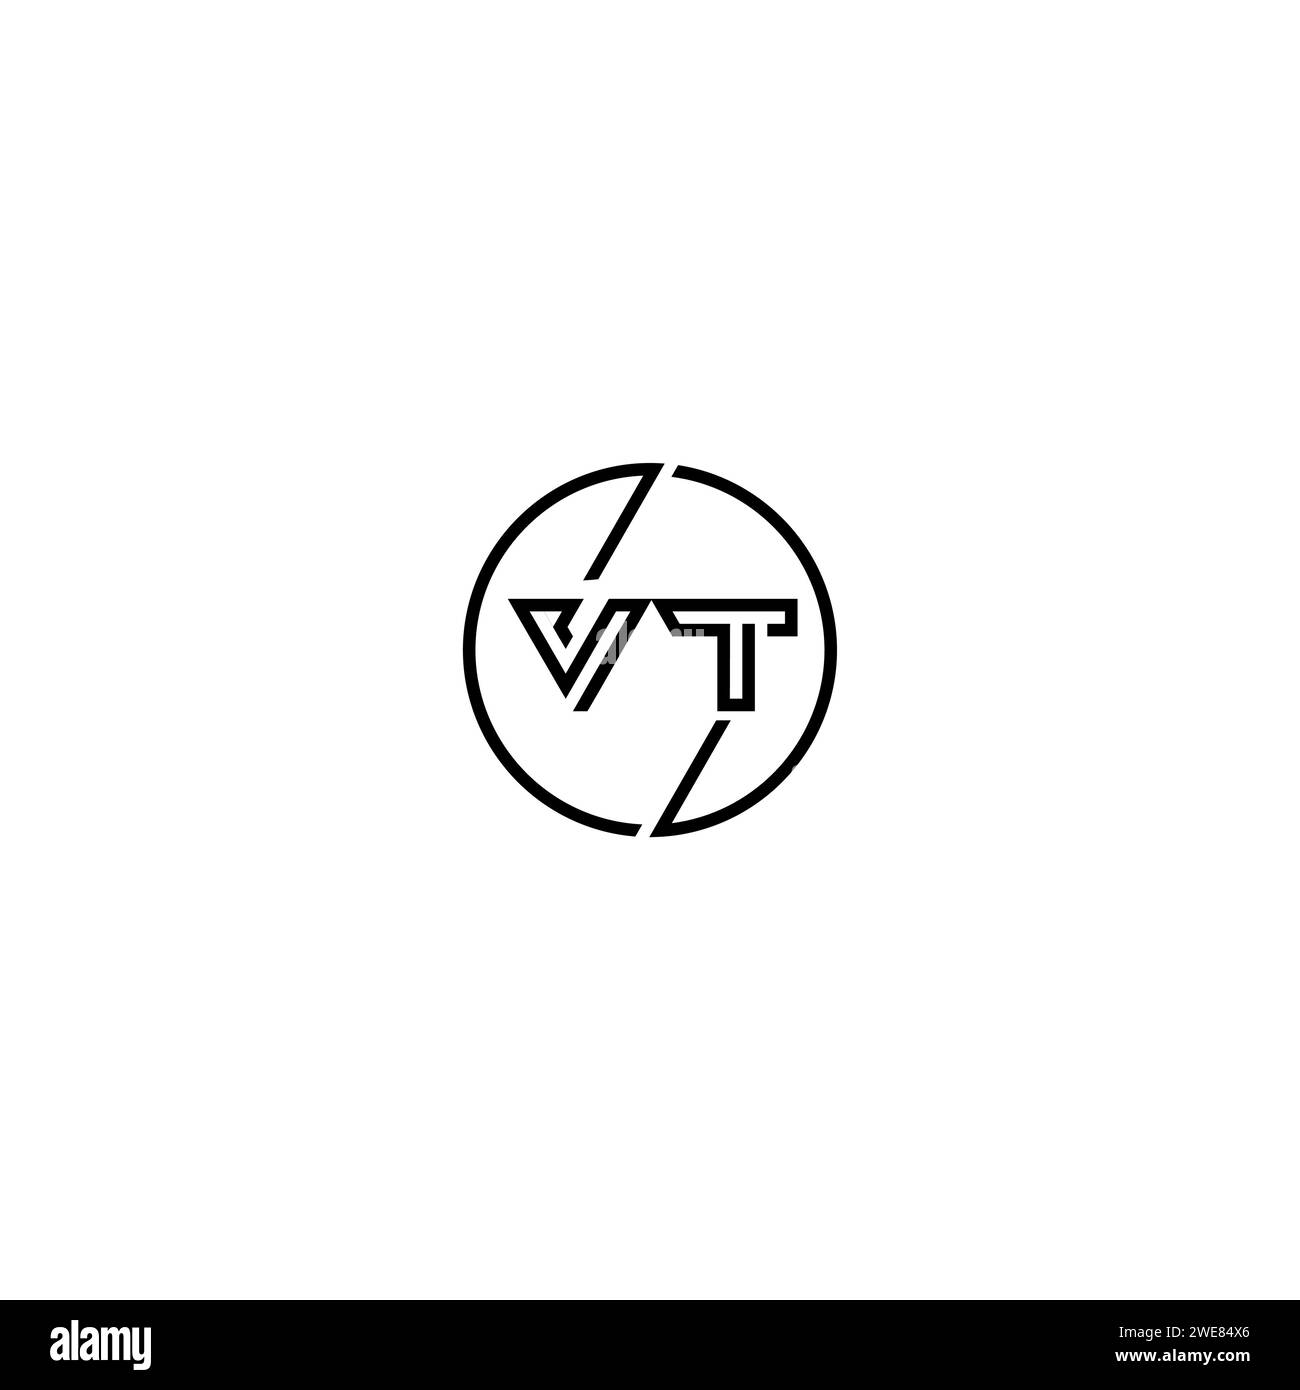 VT simple outline concept logo and circle of initial design black and white background Stock Vector